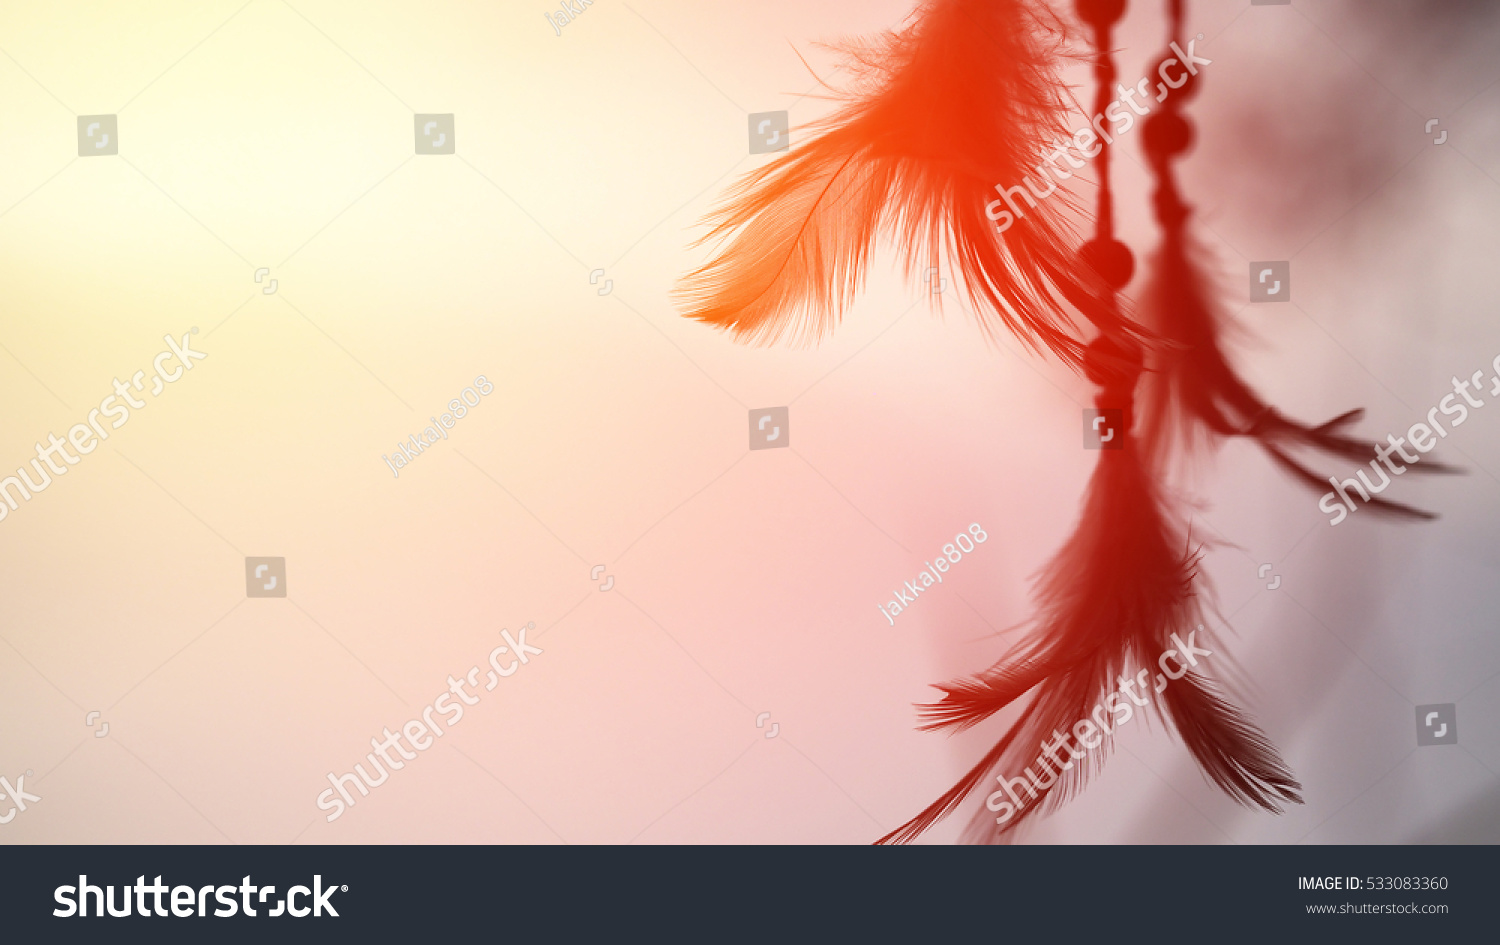 Dream catcher native american in the wind and blurred bright light background, hope and dream concept #533083360